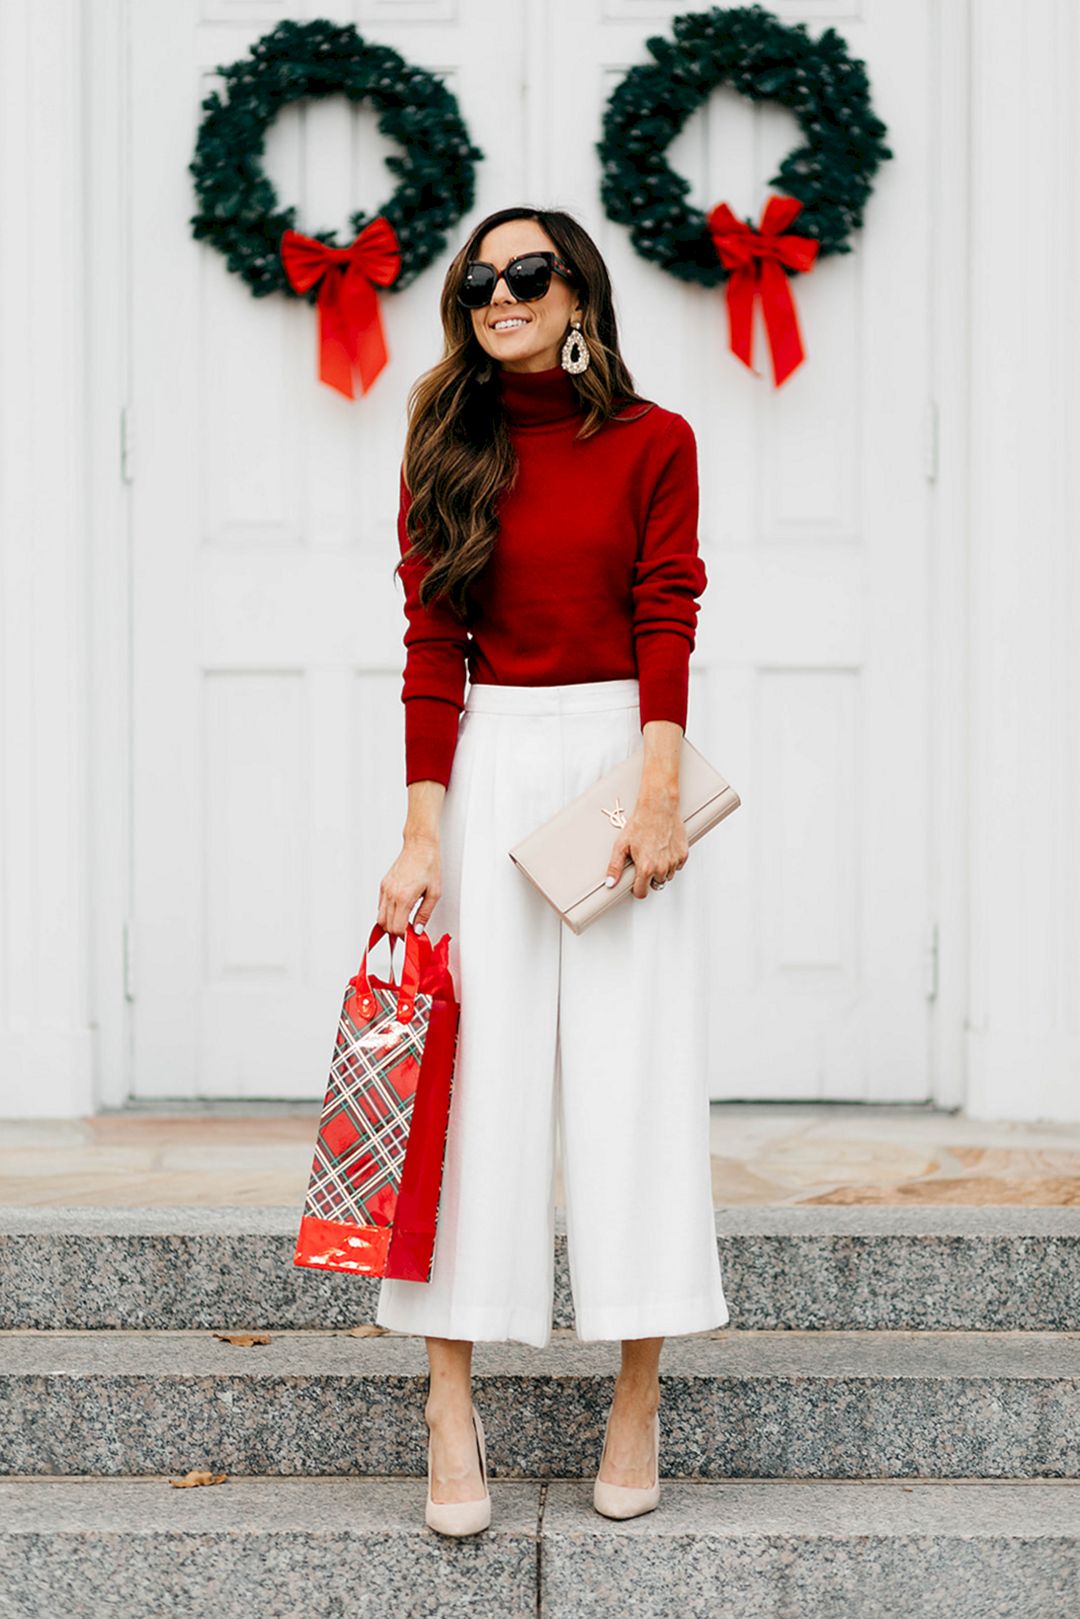 Women's Outfits Ideas with Red and White